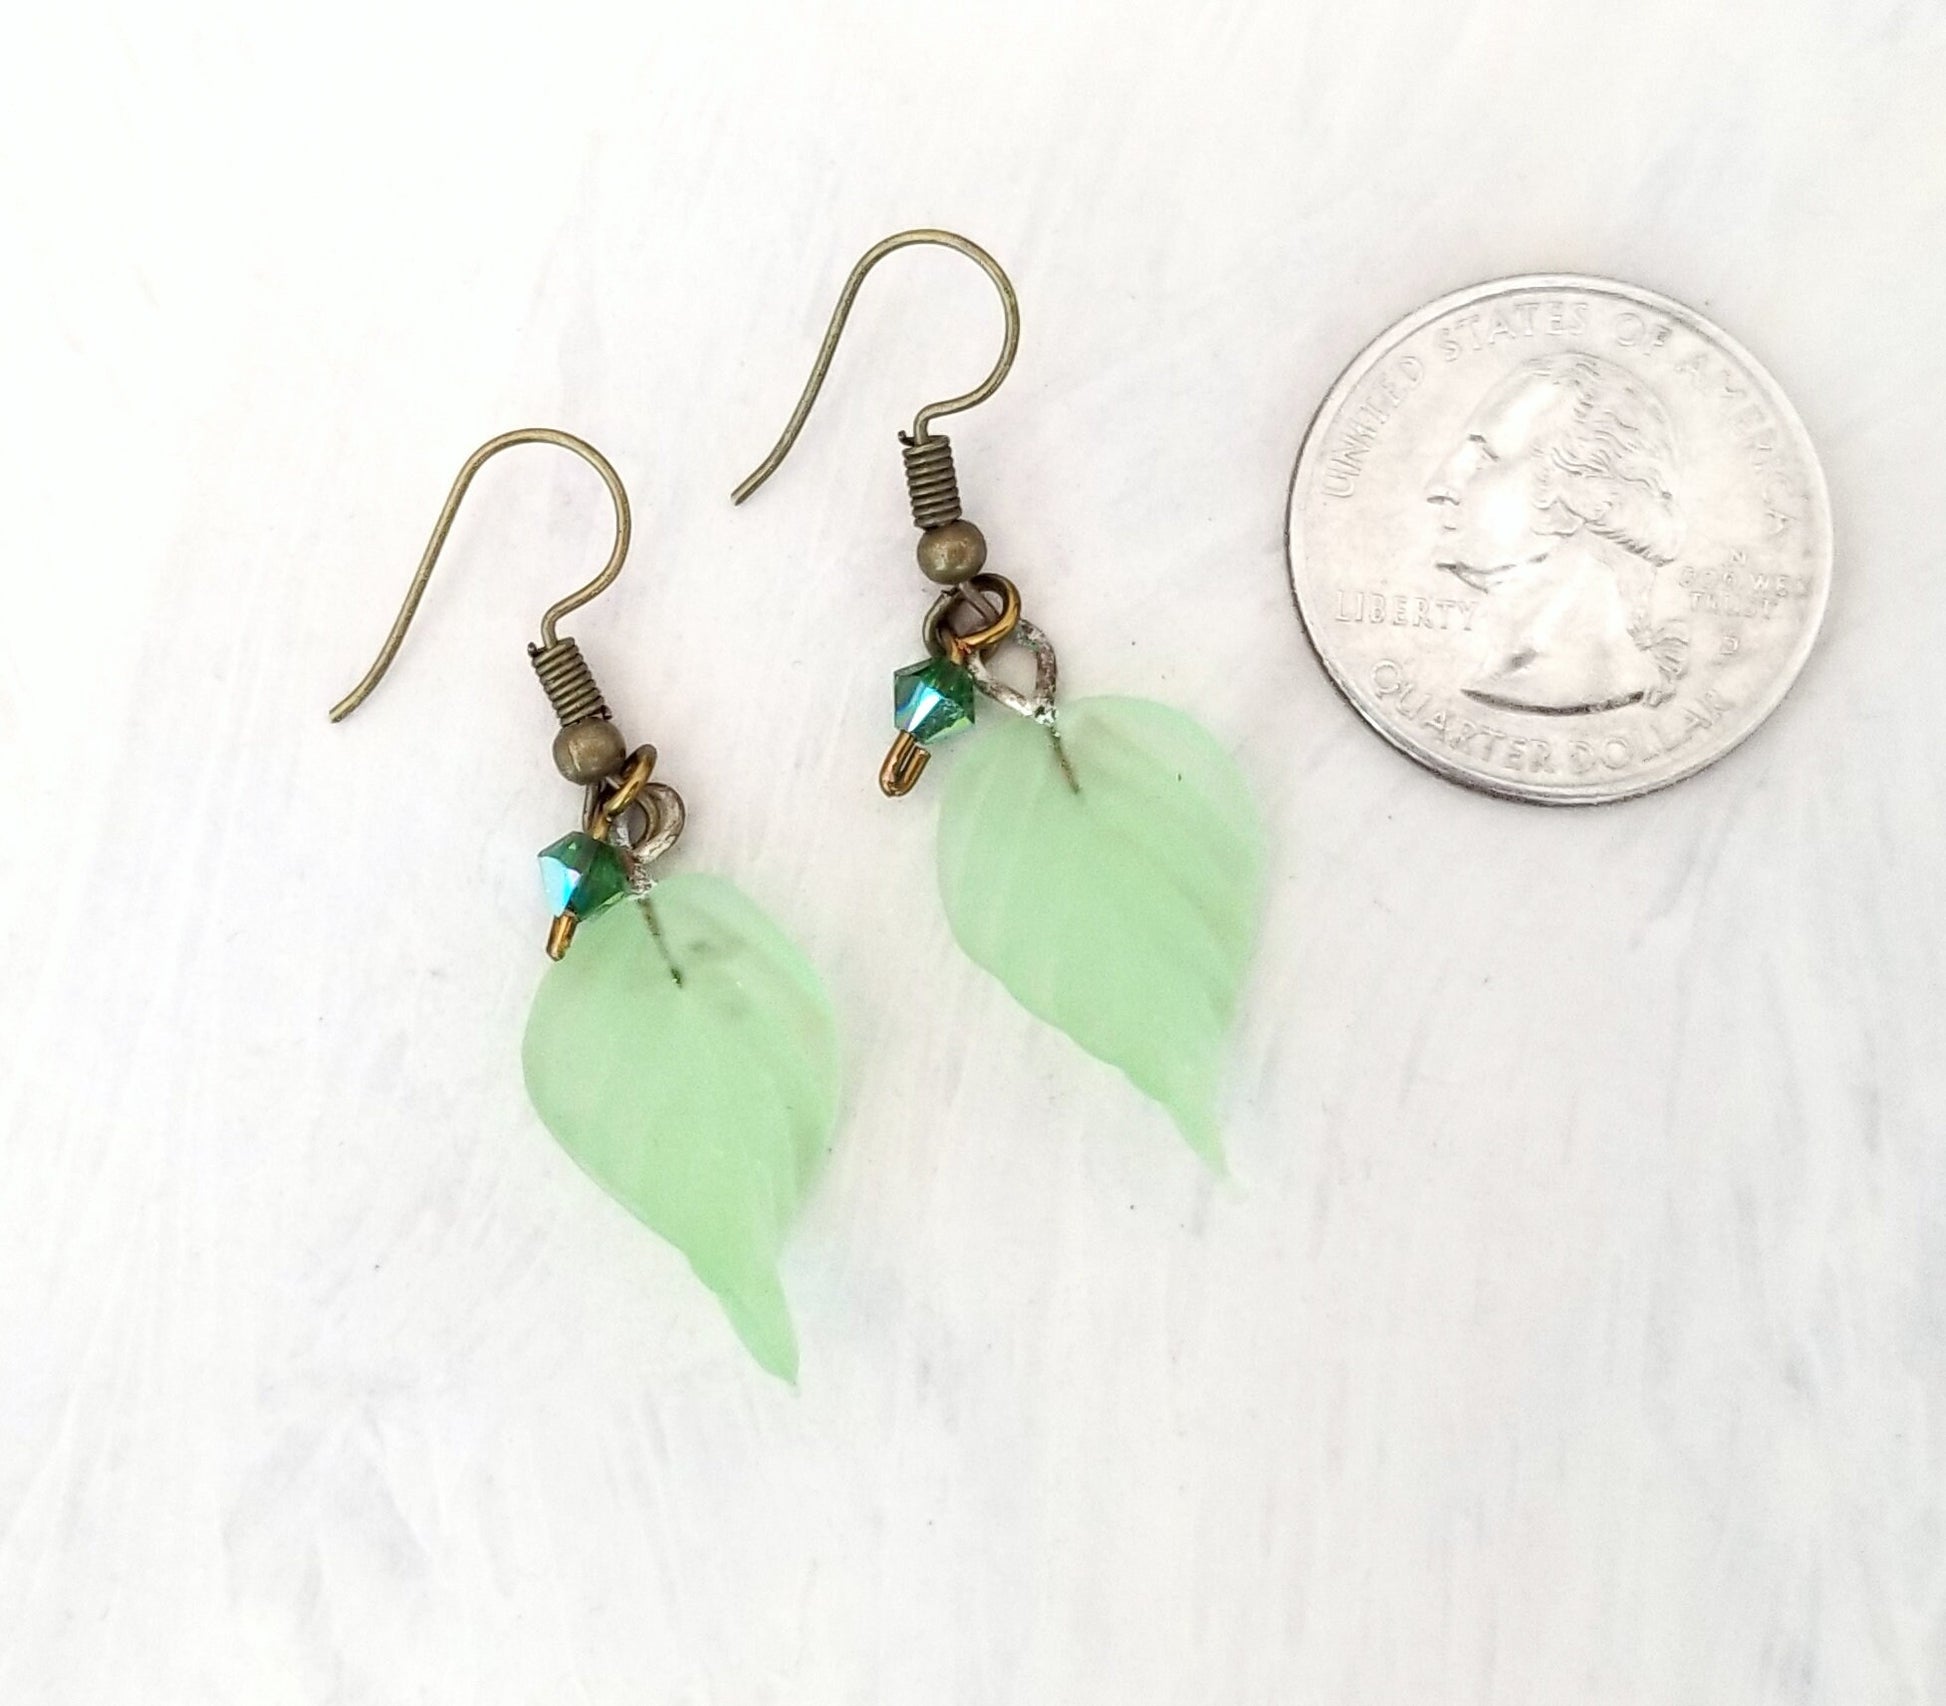 Long Glass Leaf Earrings in Frosted Light Green, Wedding, Bridesmaid, Art Nouveau, Renaissance, Forest, Choice of Closure Types